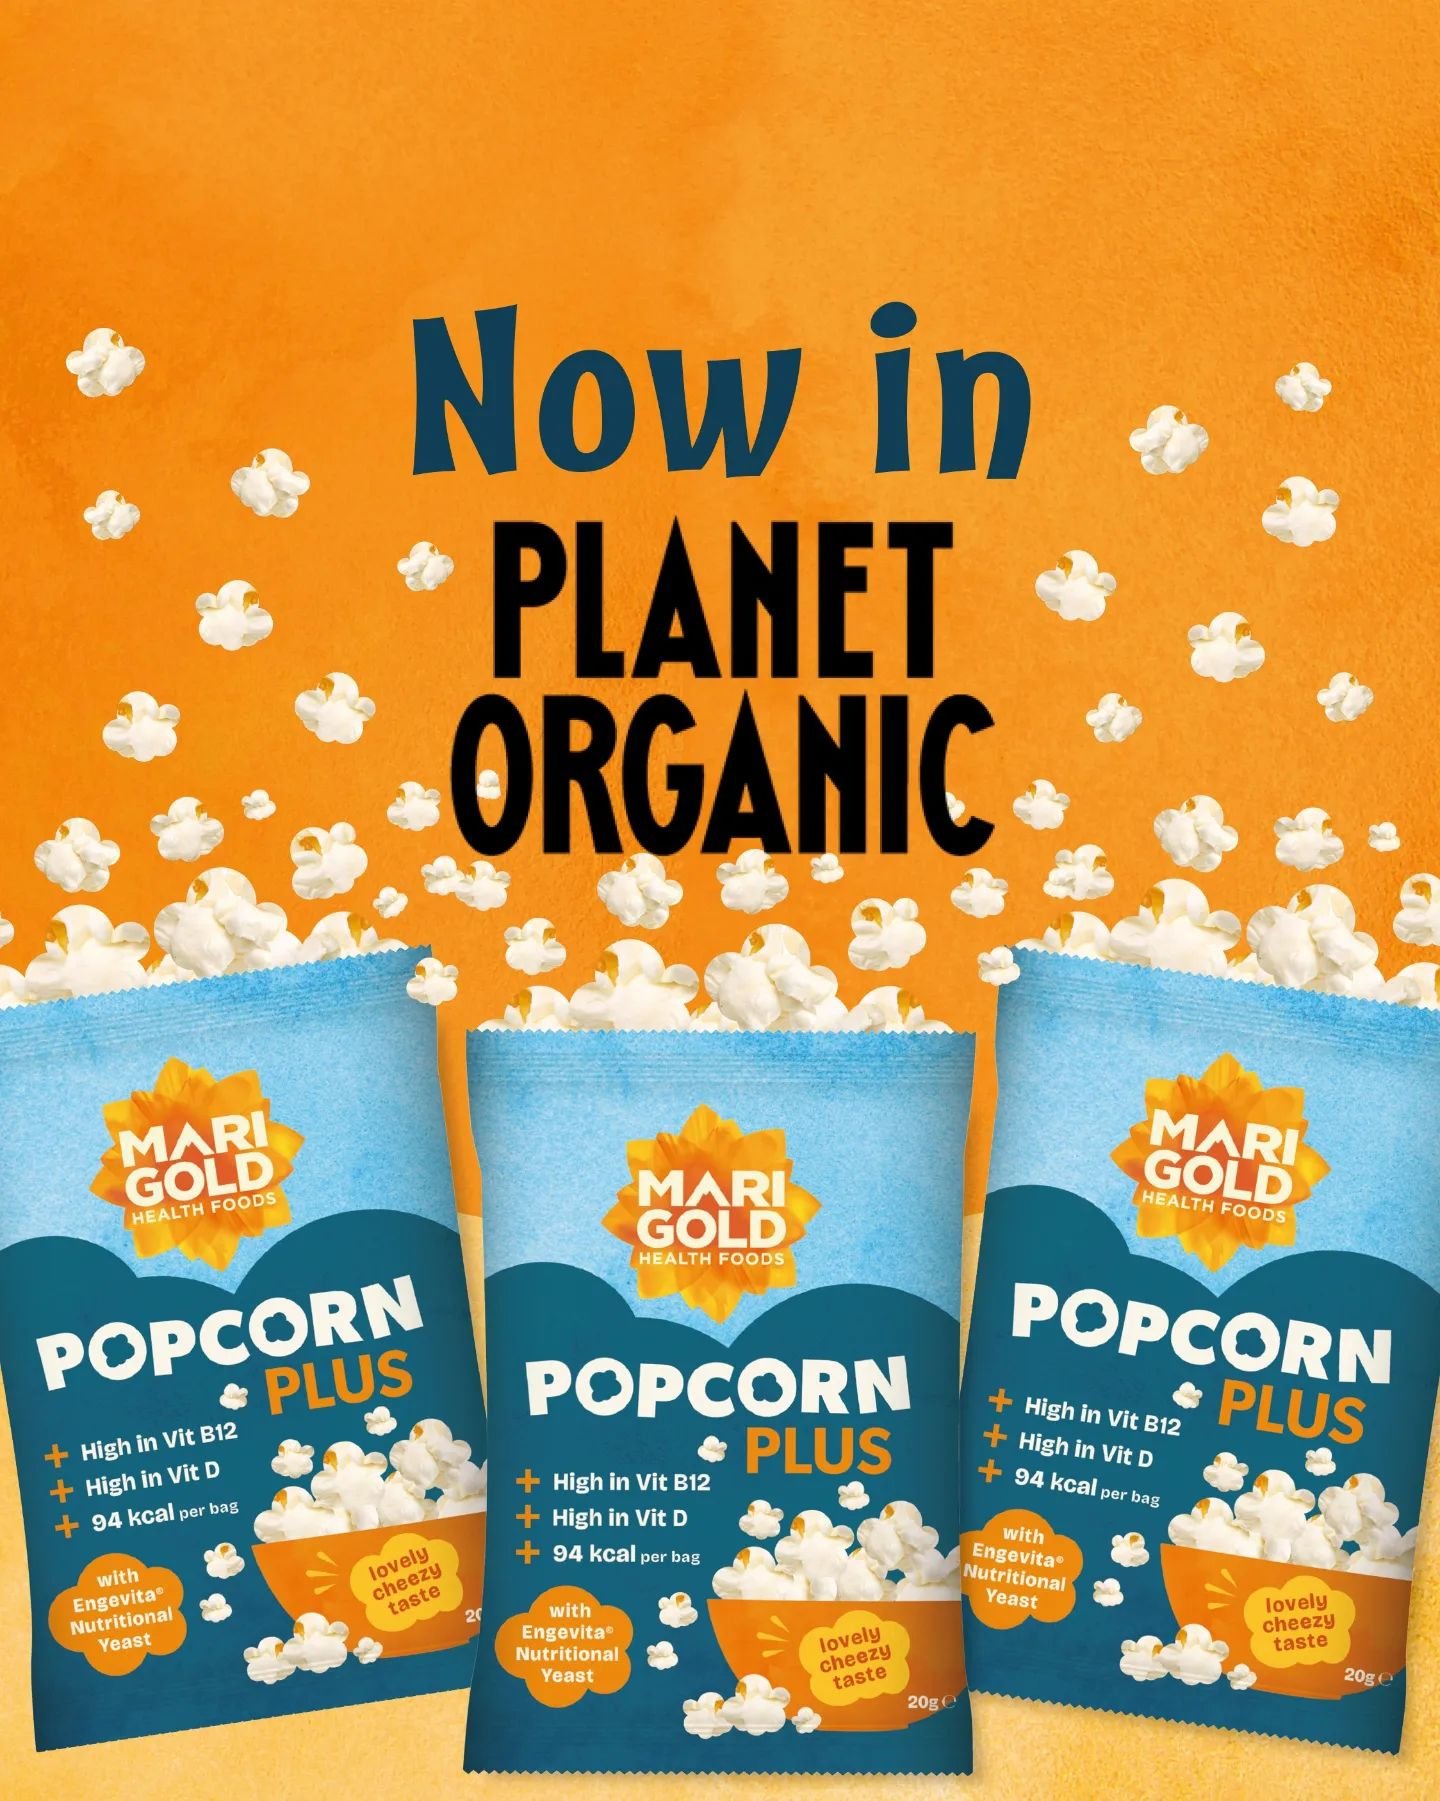 YIPPEE 🥳OUR NEW HEALTHY VEGAN SNACK POPCORN PLUS IS NOW IN PLANET ORGANIC
😋
More good news - there is 20% off until 25th June 2024
💃
Scroll left to see the offer, hit save and share with a friend who loves a savoury popcorn with banging health ben